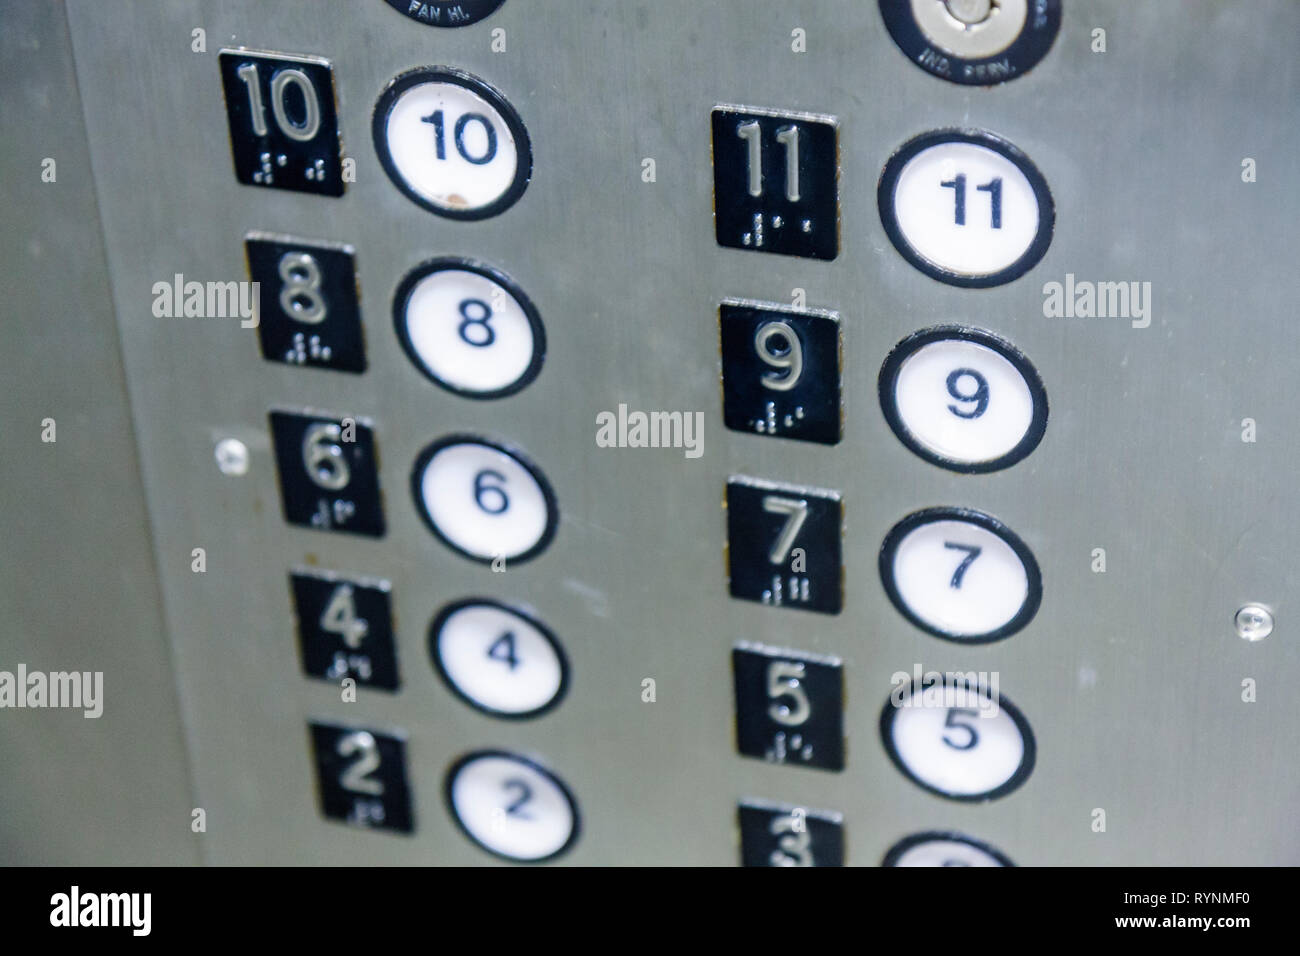 Elevator Buttons Stock Photos Elevator Buttons Stock Images Alamy